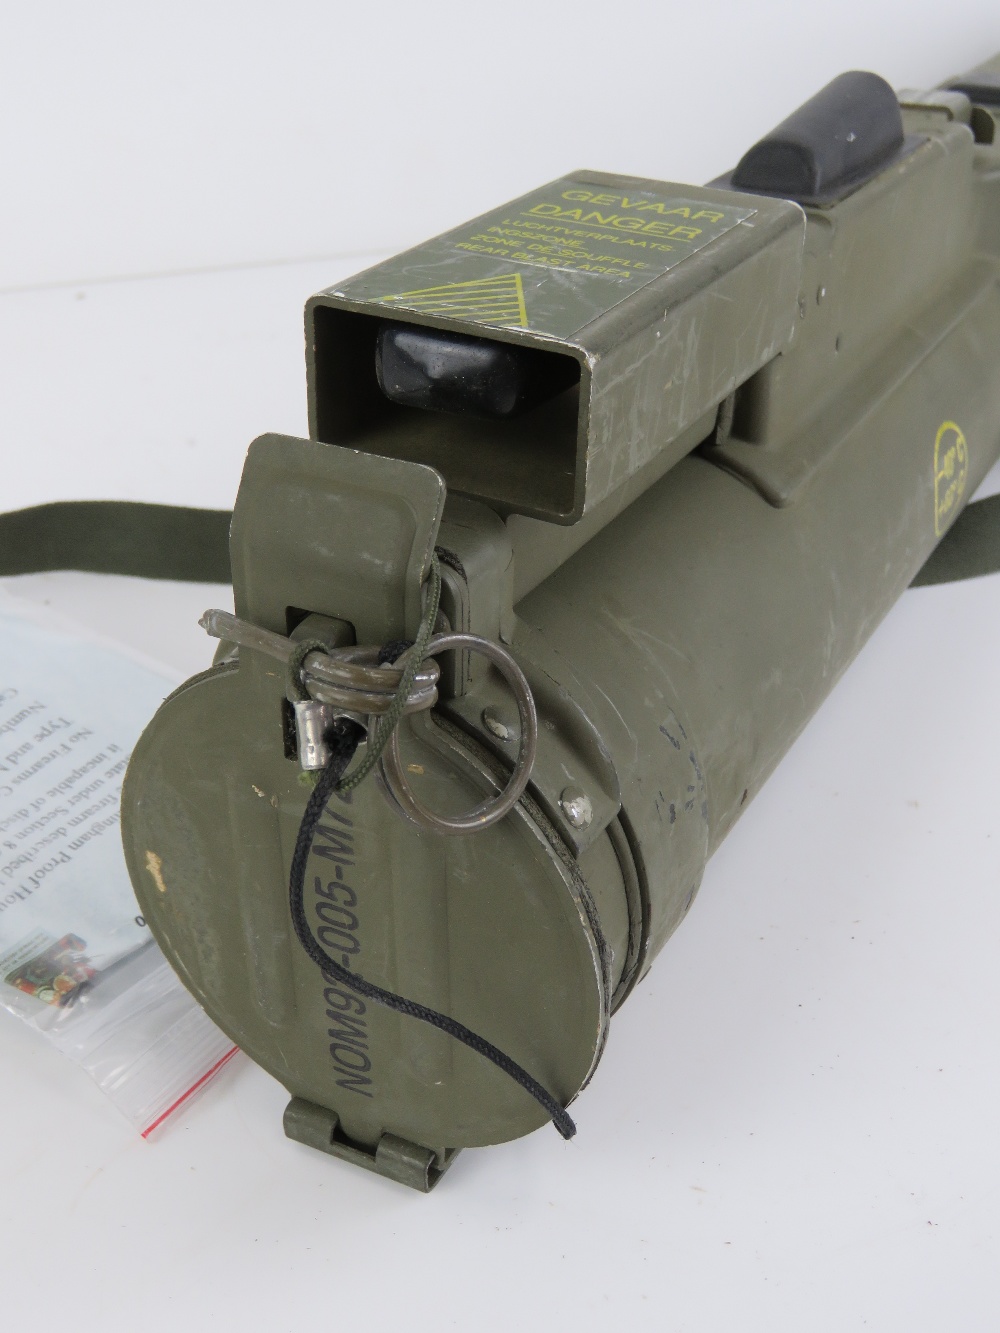 A deactivated M72 LAW 66mm Rocket Launcher, opens and closes, with sights, end cap and carry strap. - Image 3 of 3